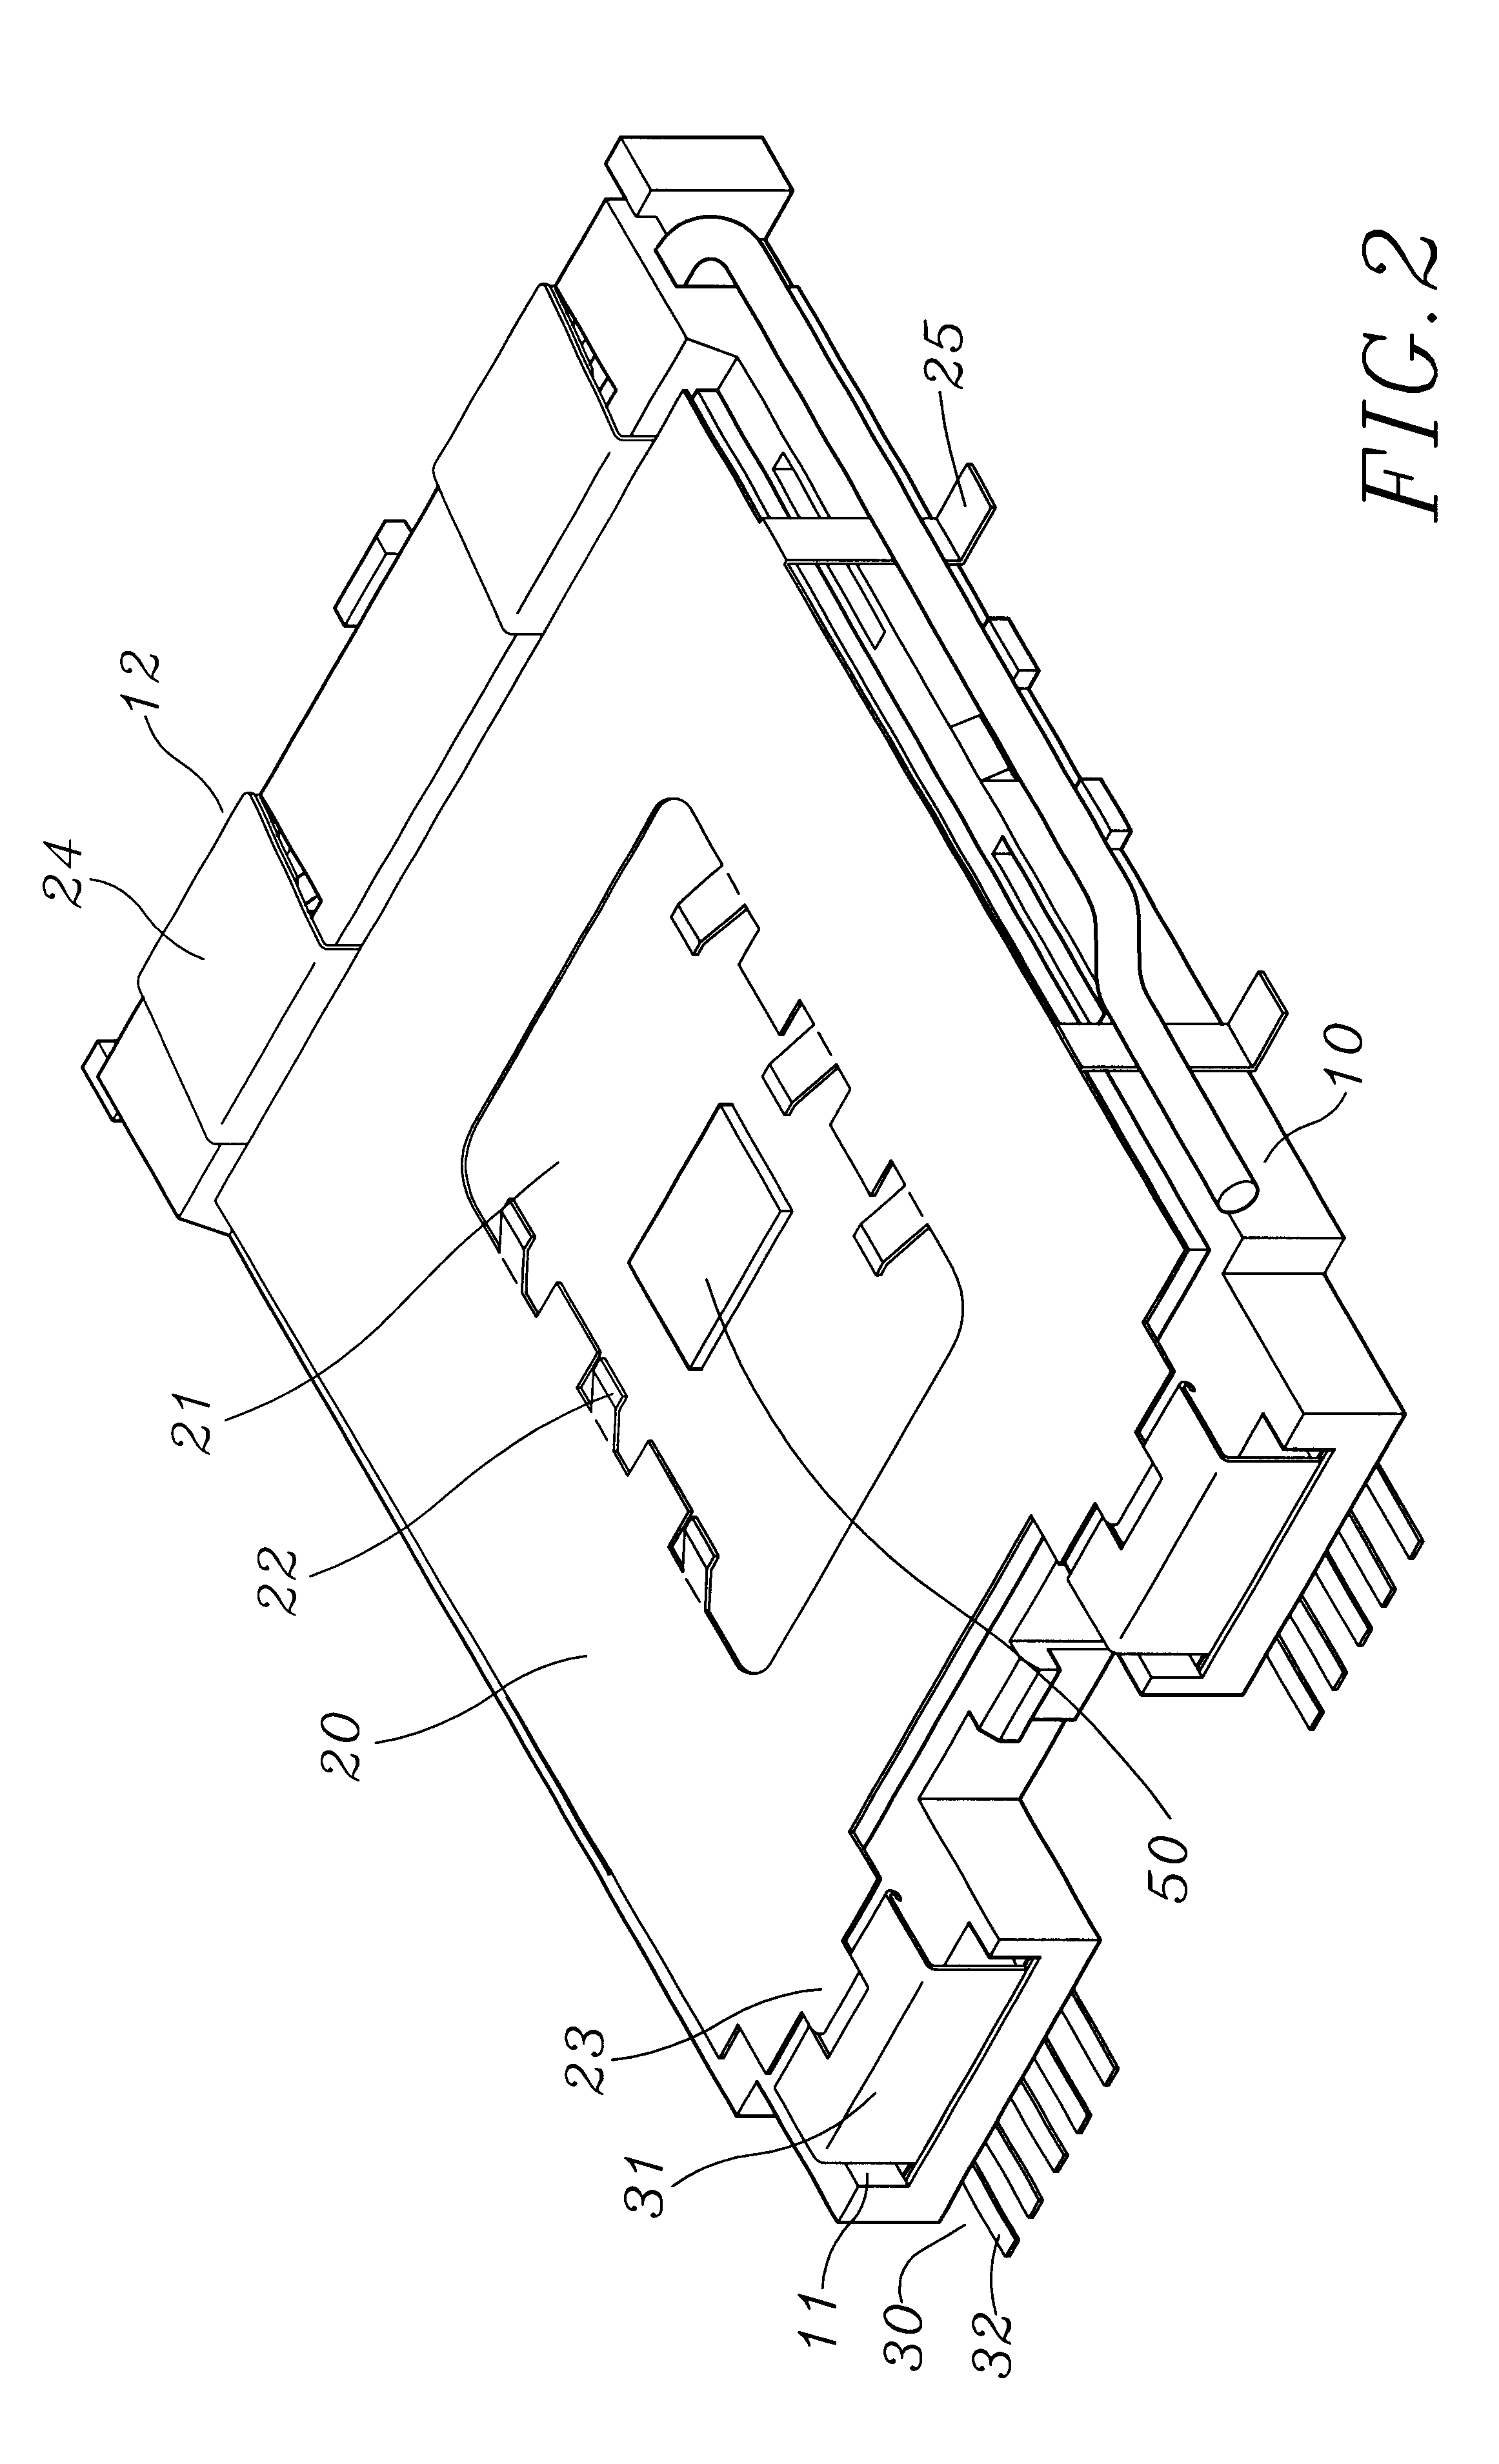 Structure for preventing electromagnetic interference of central processing unit